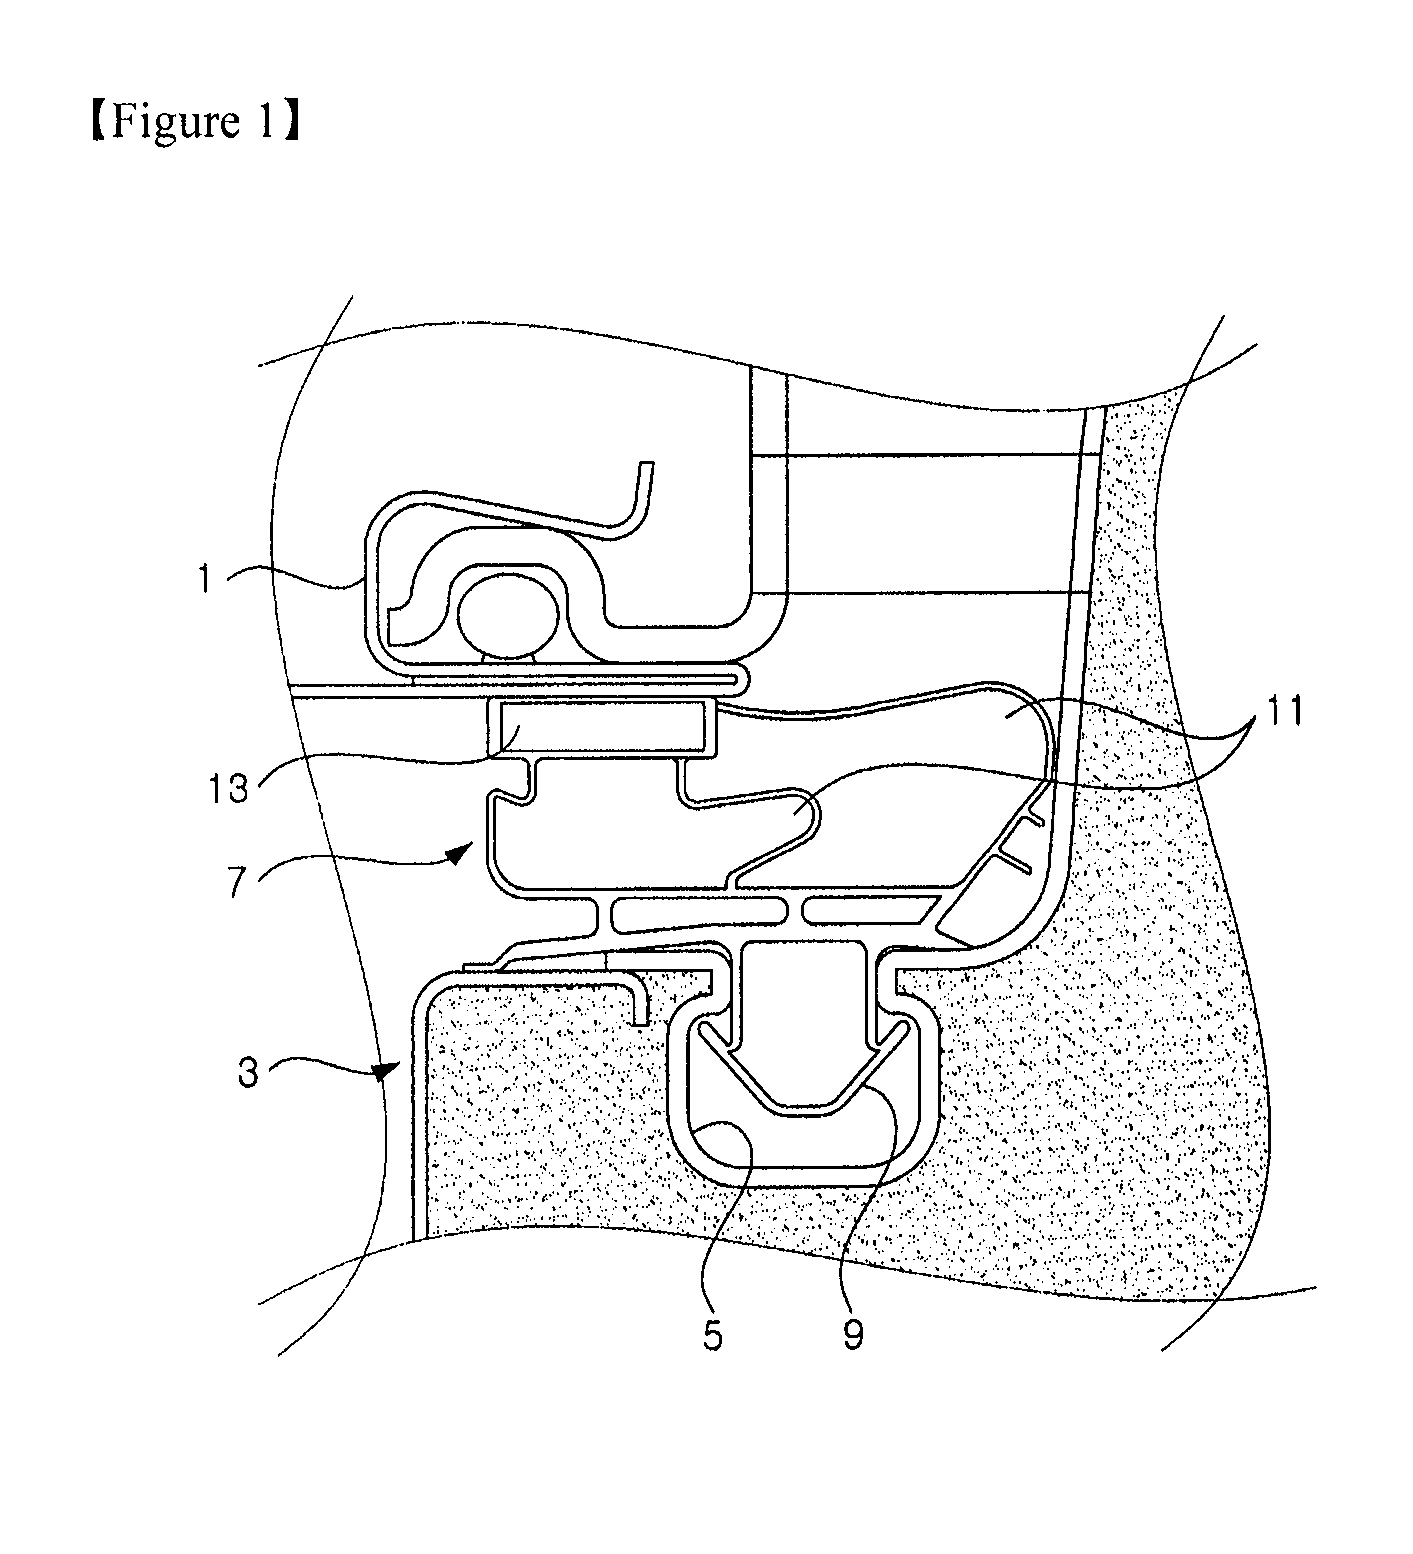 Gasket of Door for Refrigerator and Making Method the Same